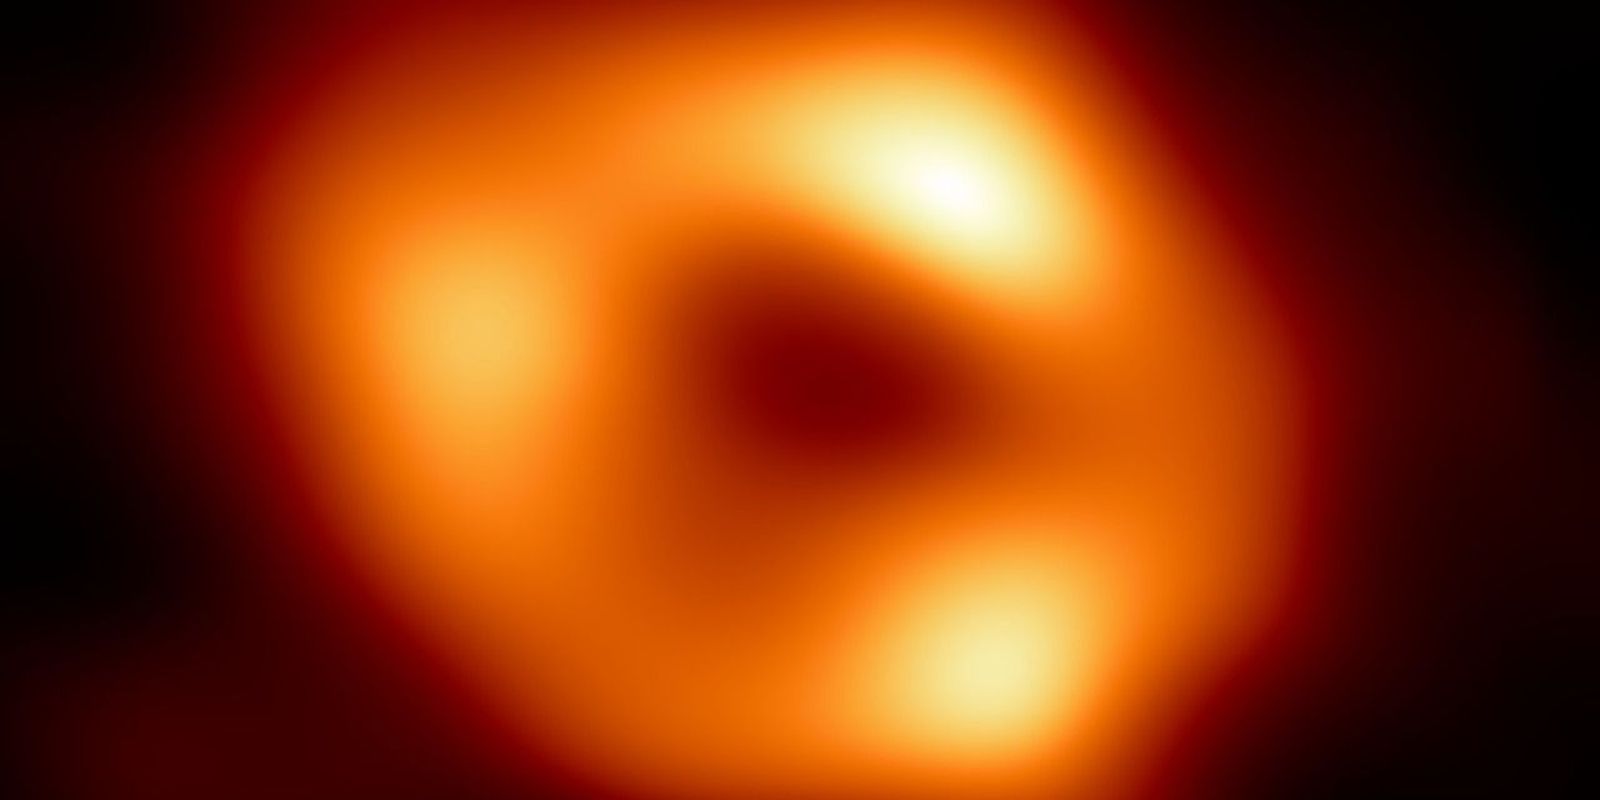 Astronomers release first images of the Milky Way's black hole